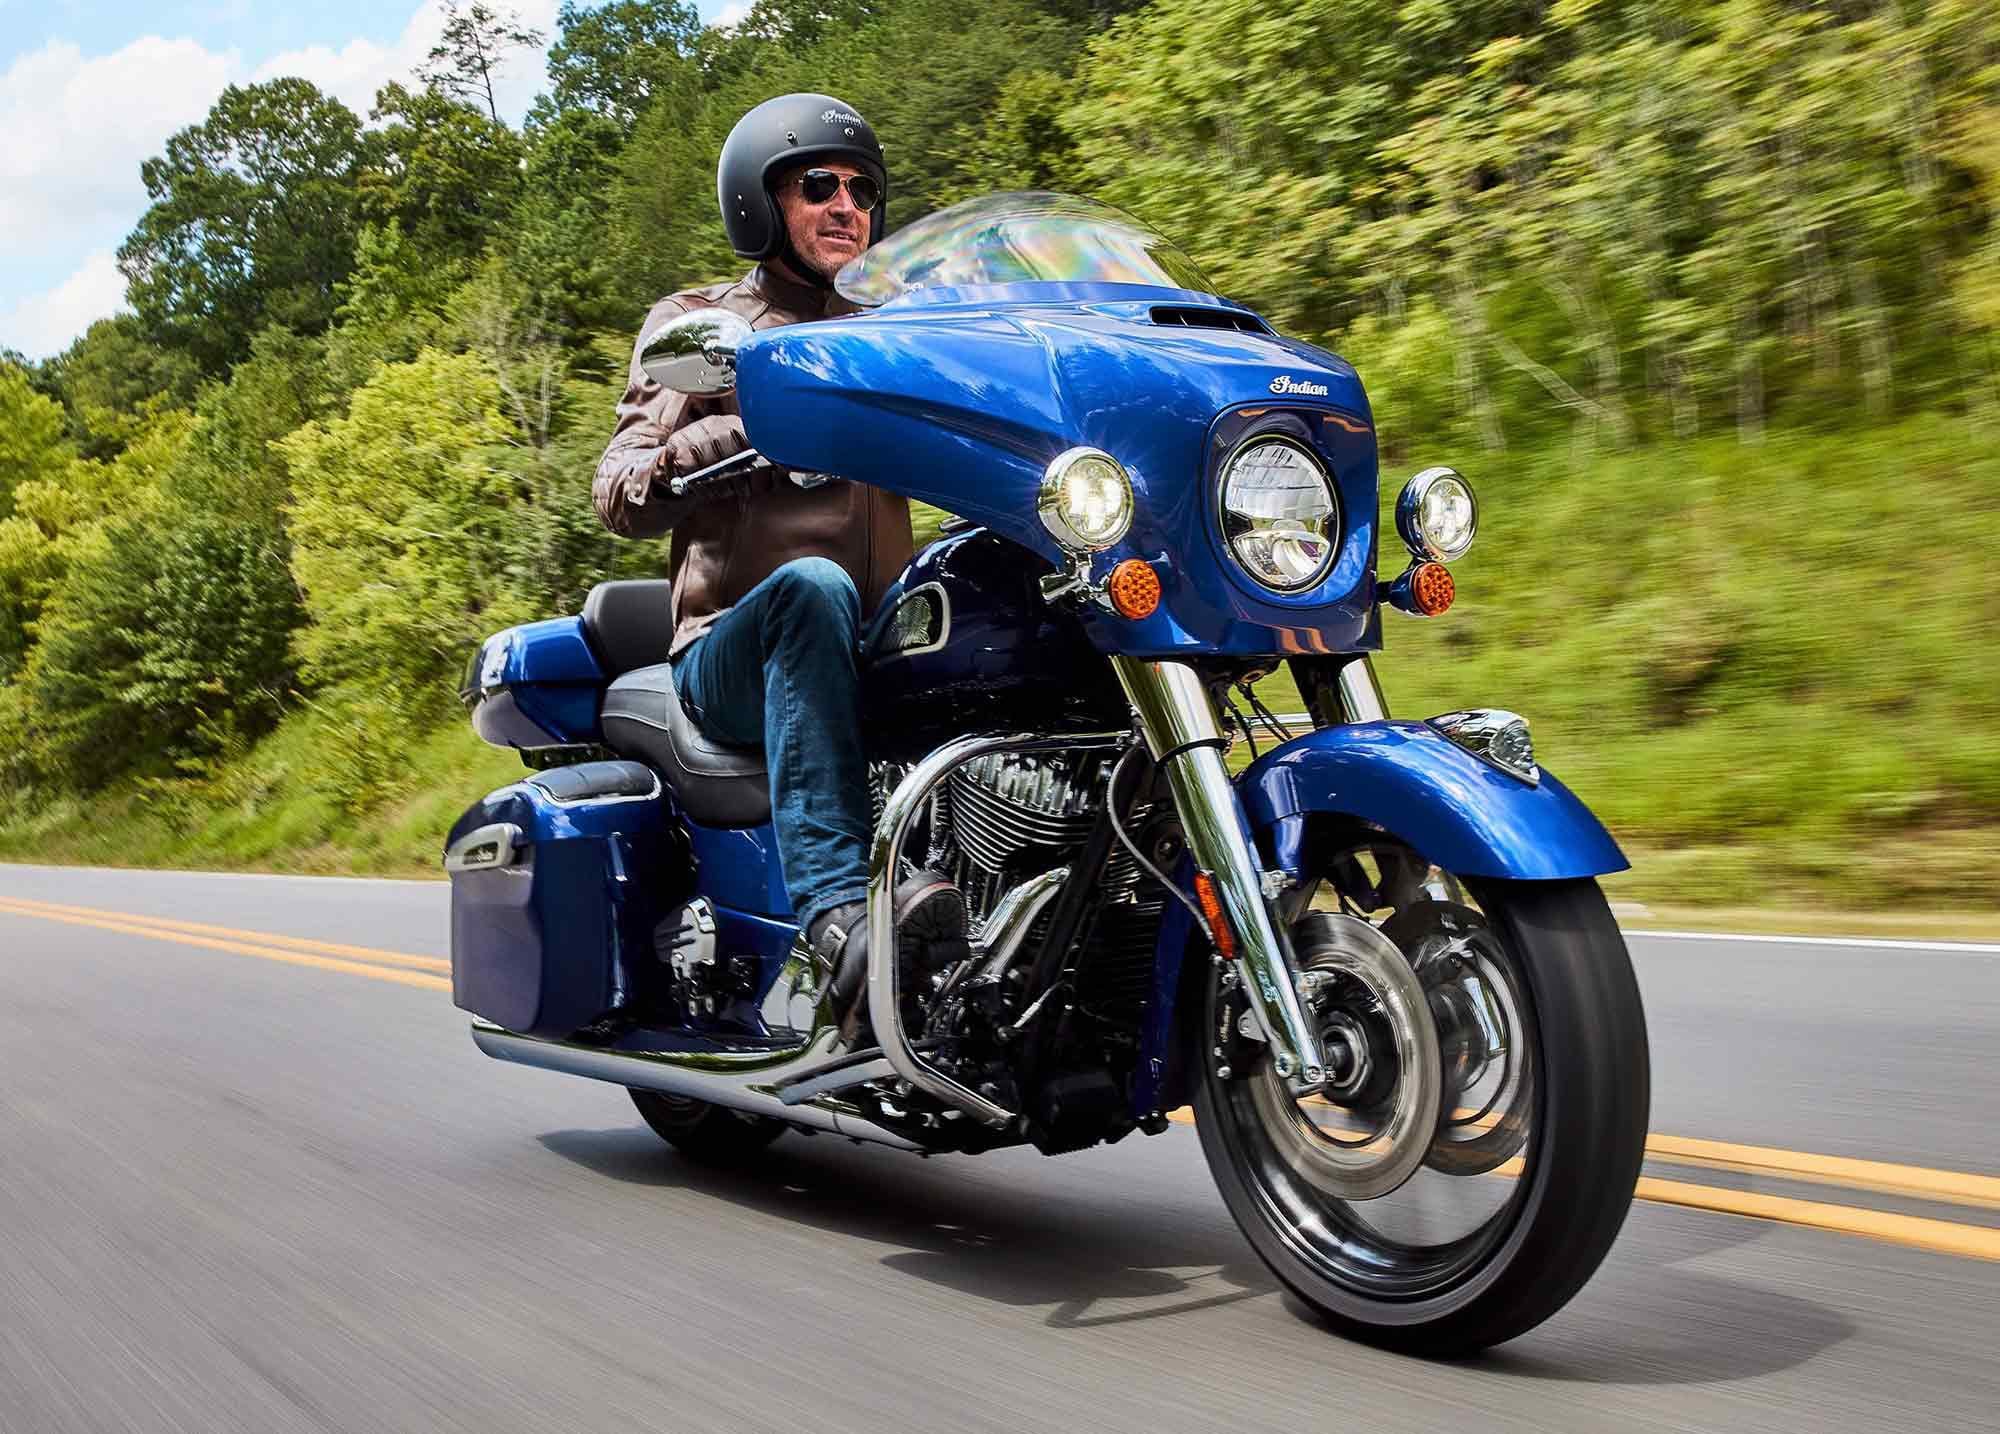 Spirit Blue Metallic is a new color option on the 2023 Chieftain Limited; it’ll cost $28,749. Model is shown with accessories.